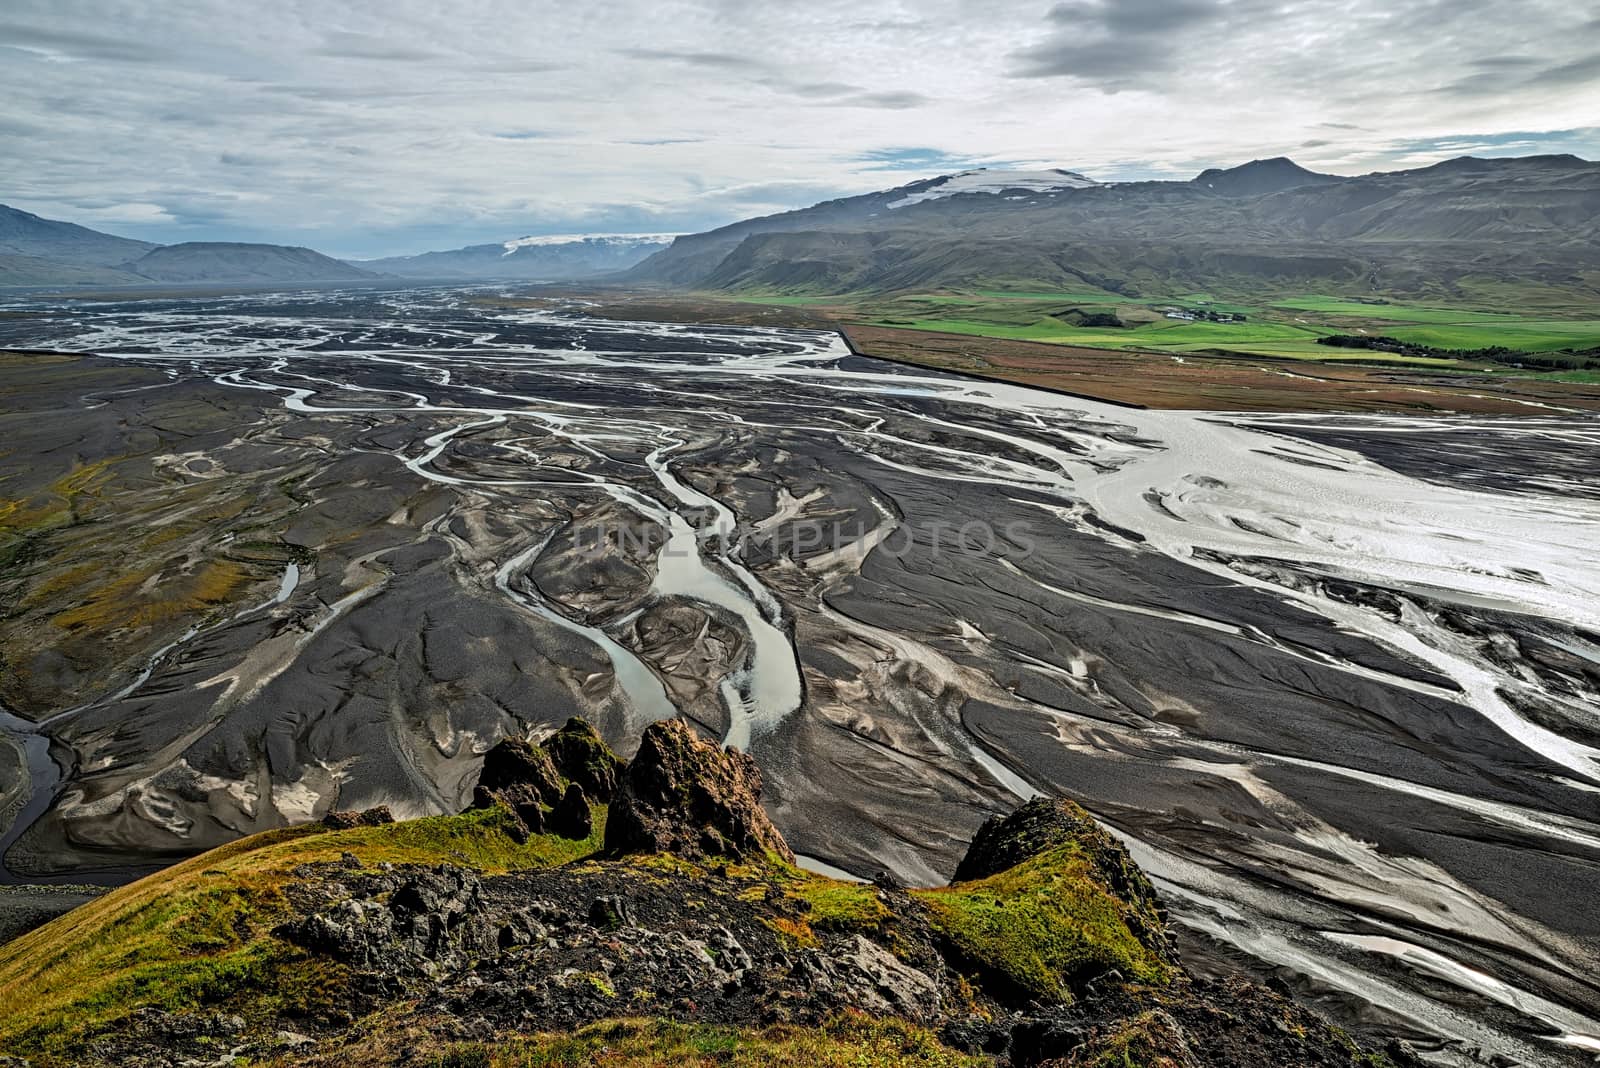 Majestic river bed in Iceland by LuigiMorbidelli